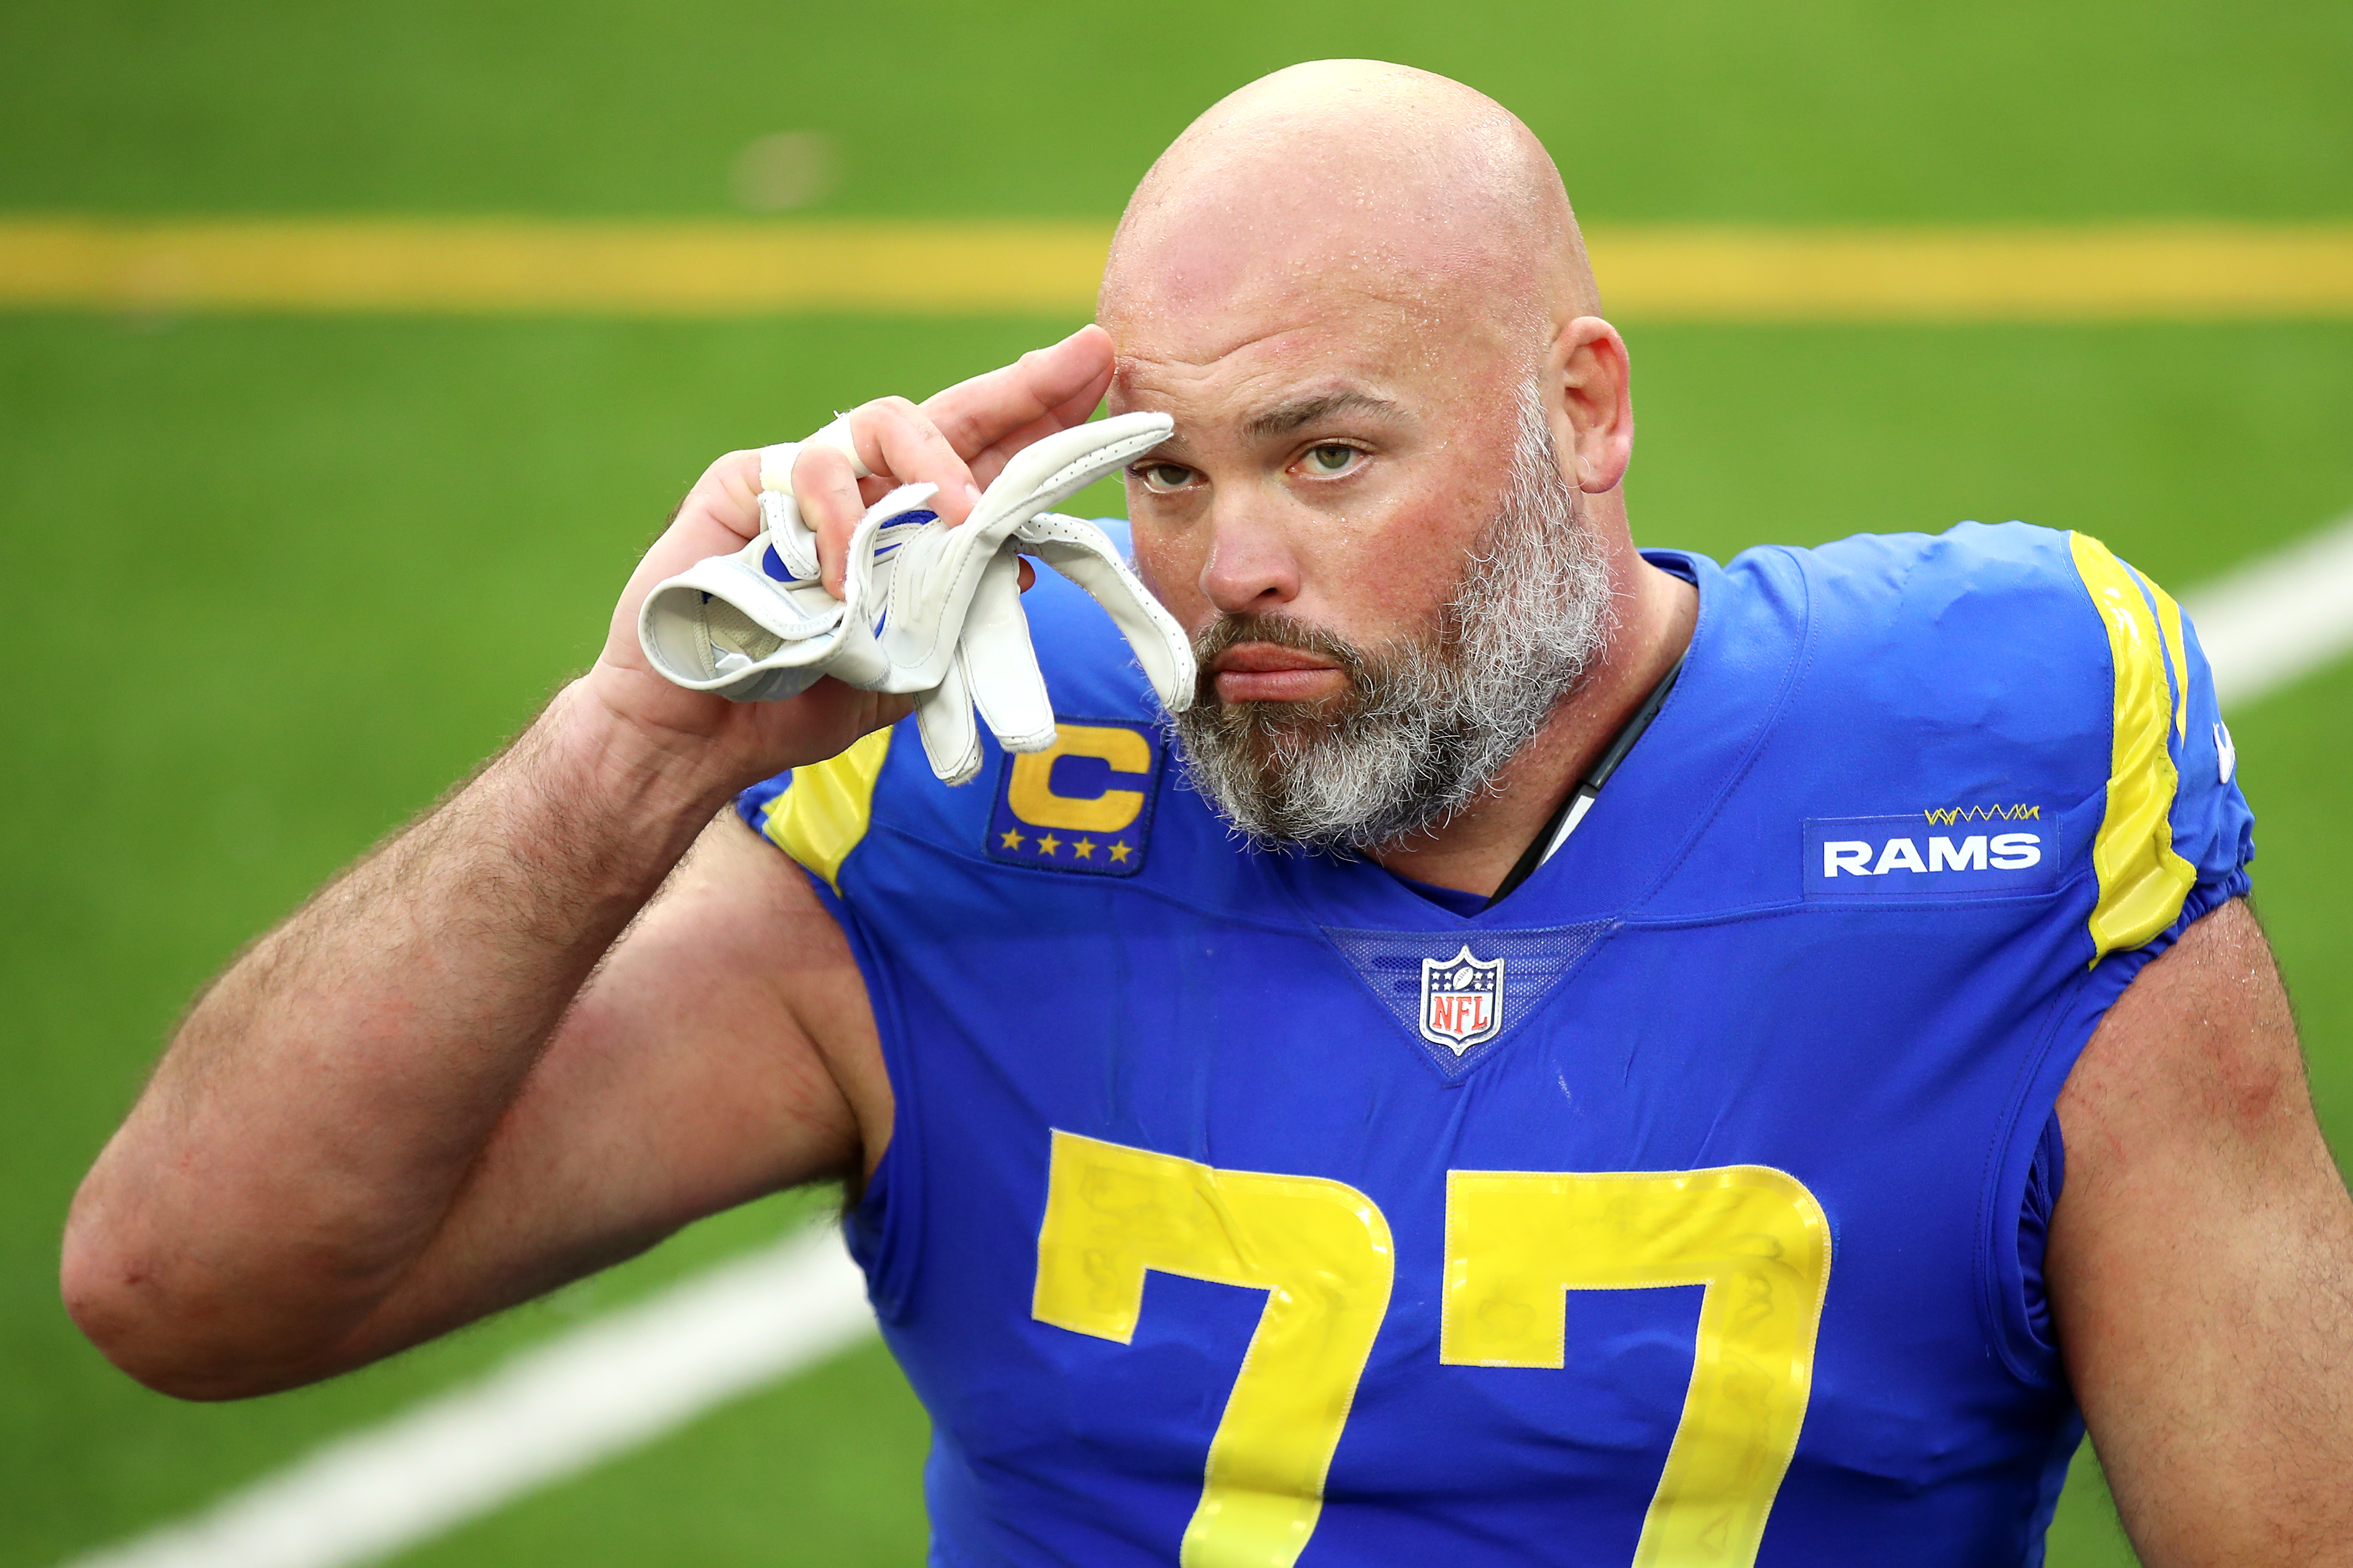 Rams OT Andrew Whitworth Announces NFL Retirement After 16 Seasons